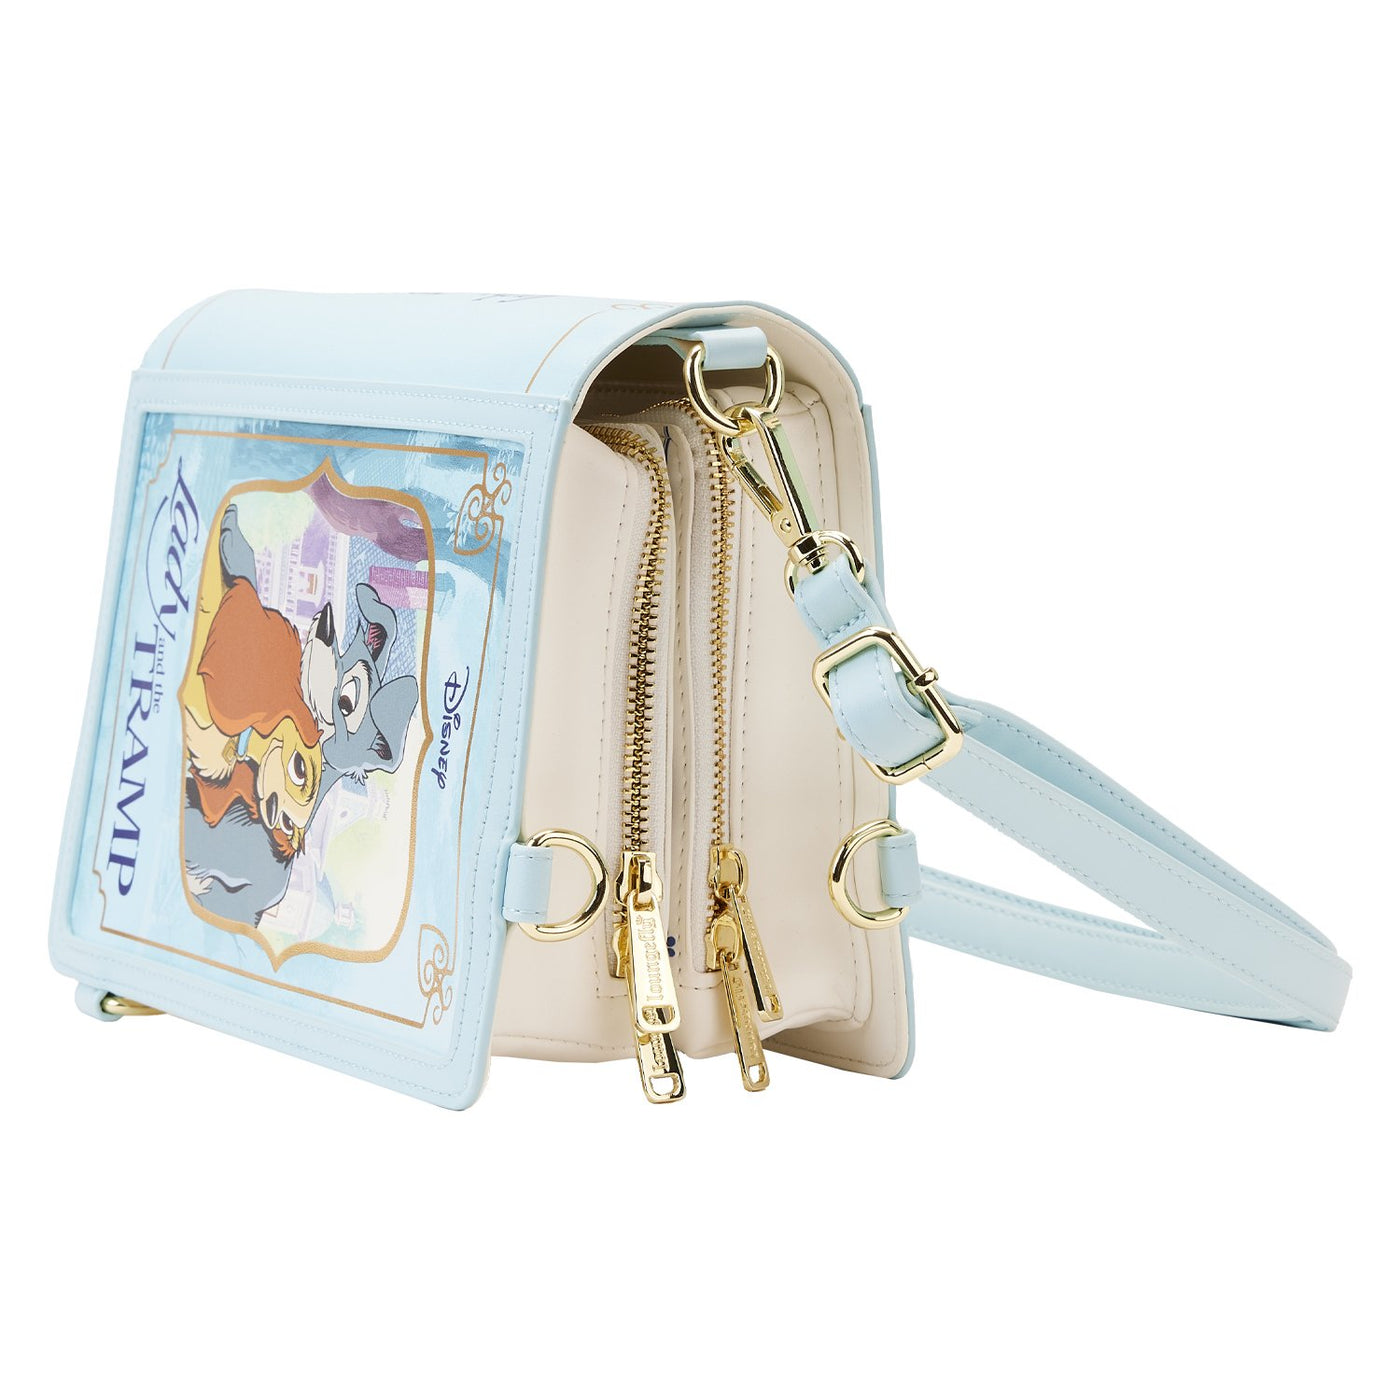 671803448377 - Loungefly Disney Lady and the Tramp Classic Book Convertible Crossbody - Top View